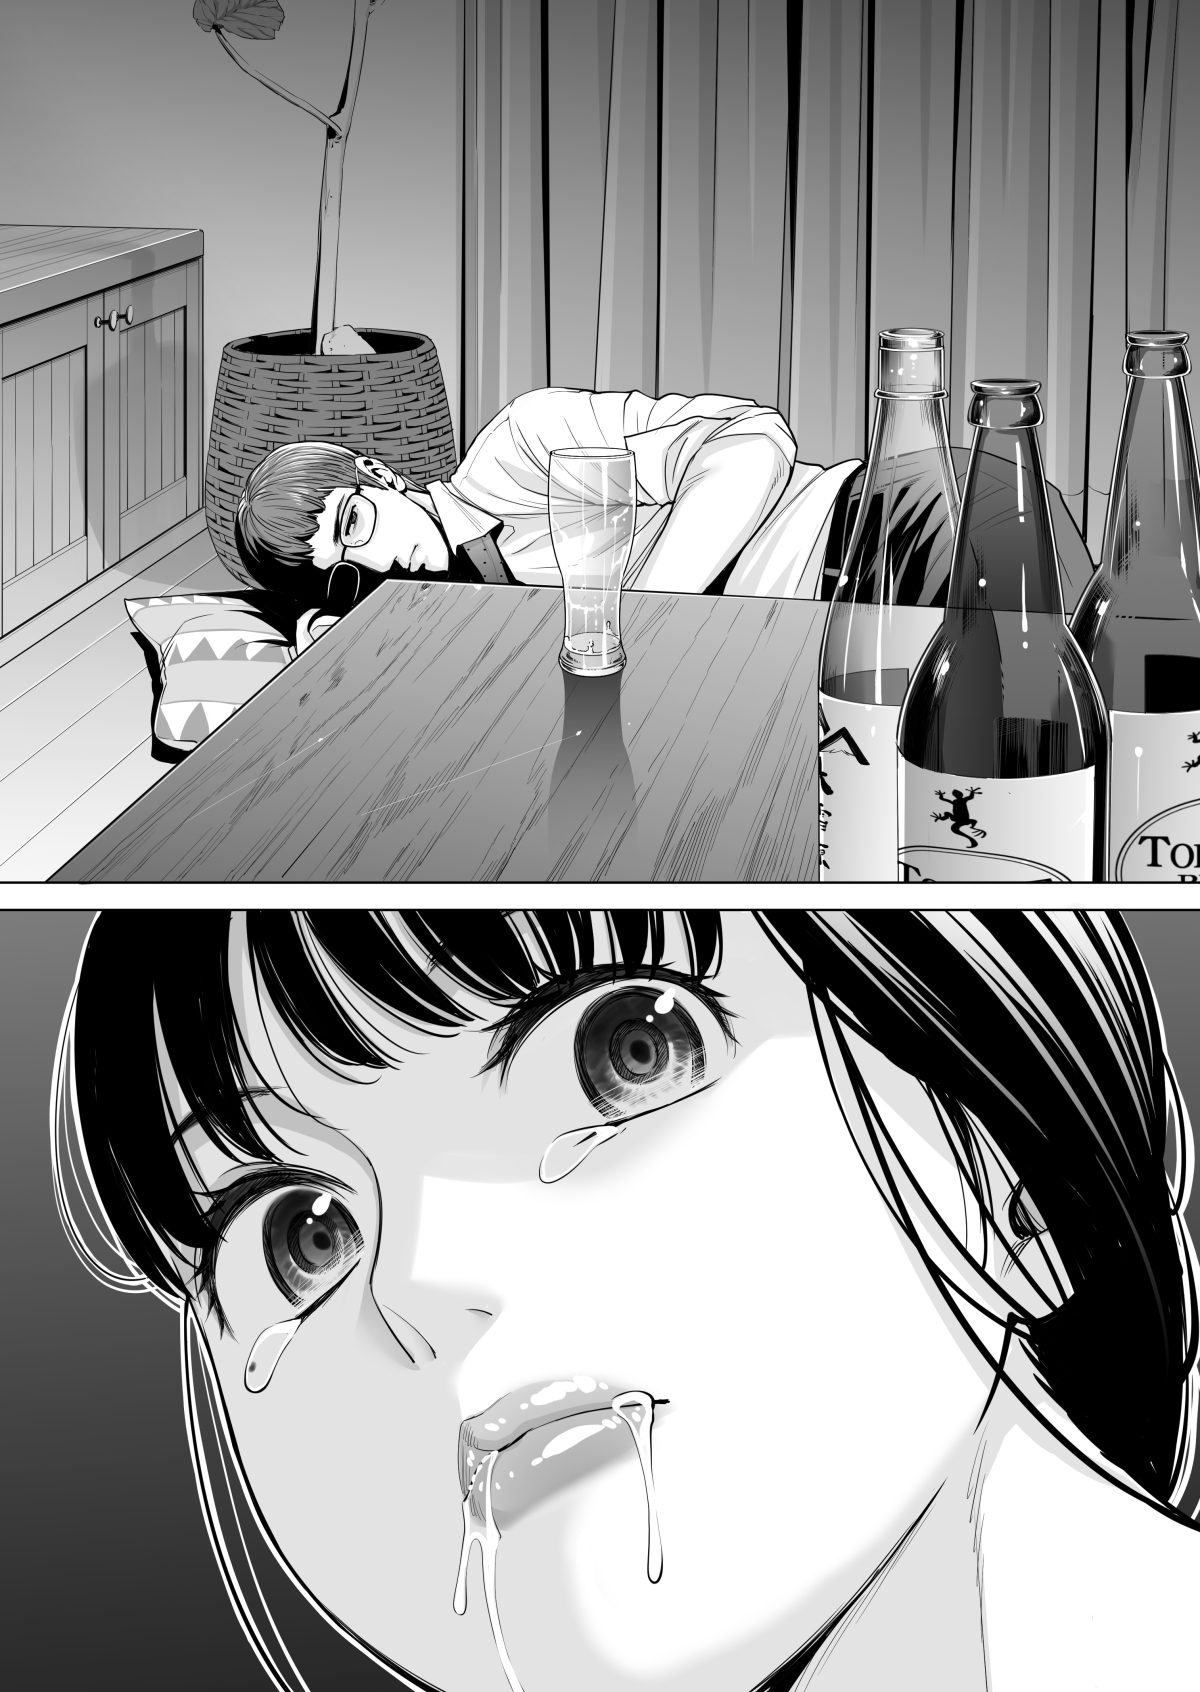 Tsukiyo no Midare Zake  Moonlit Intoxication ~ A Housewife Stolen by a Coworker Besides her Blackout Drunk Husband ~ Chapter 1 numero d'image 58